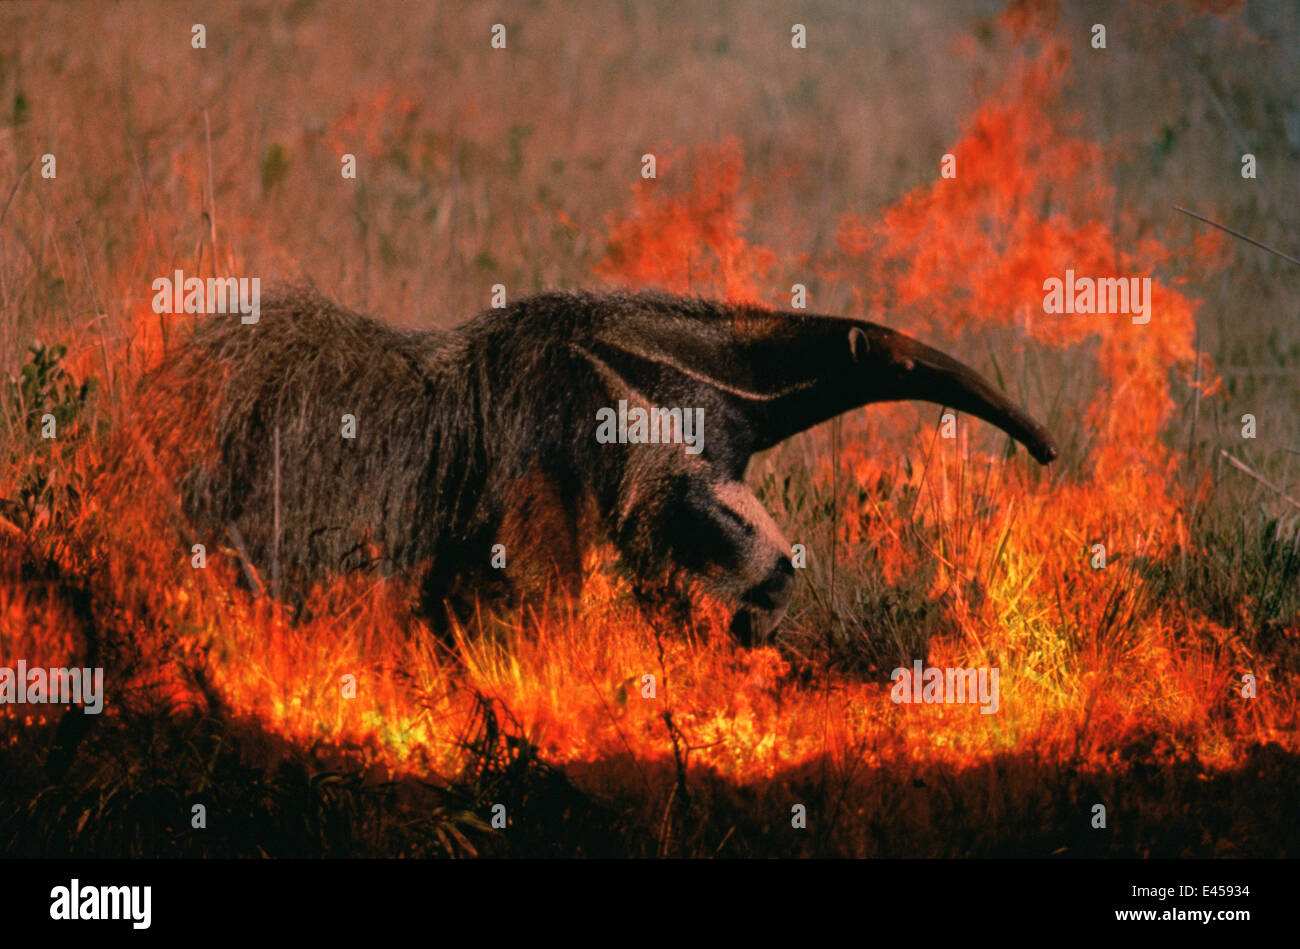 Giant anteater in grassland fire {Myremecophaga tridactyla} Emas NP, Brazil - composite image Stock Photo